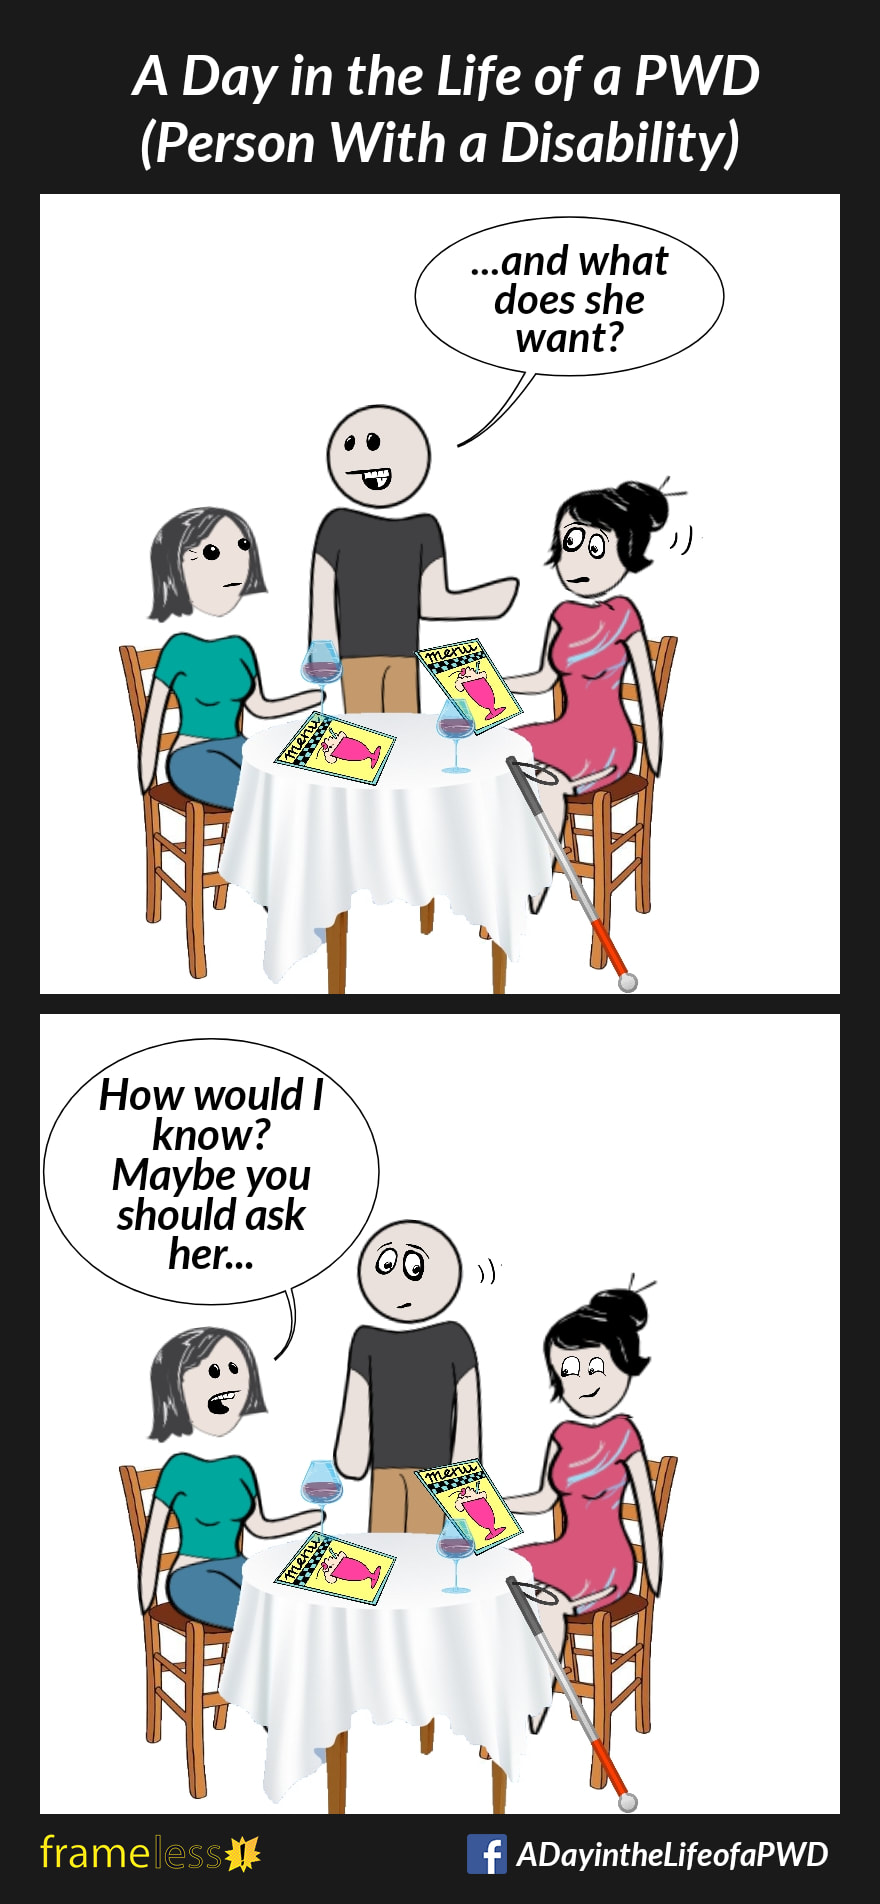 COMIC STRIP 
A Day in the Life of a PWD (Person With a Disability) 

Frame 1:
A blind woman who uses a white cane is sitting at a restaurant table with a friend. A waiter is taking their order.
WAITER (to friend): ...and what does she want? (points at woman)

Frame 2:
FRIEND: How would I know? Maybe you should ask her...